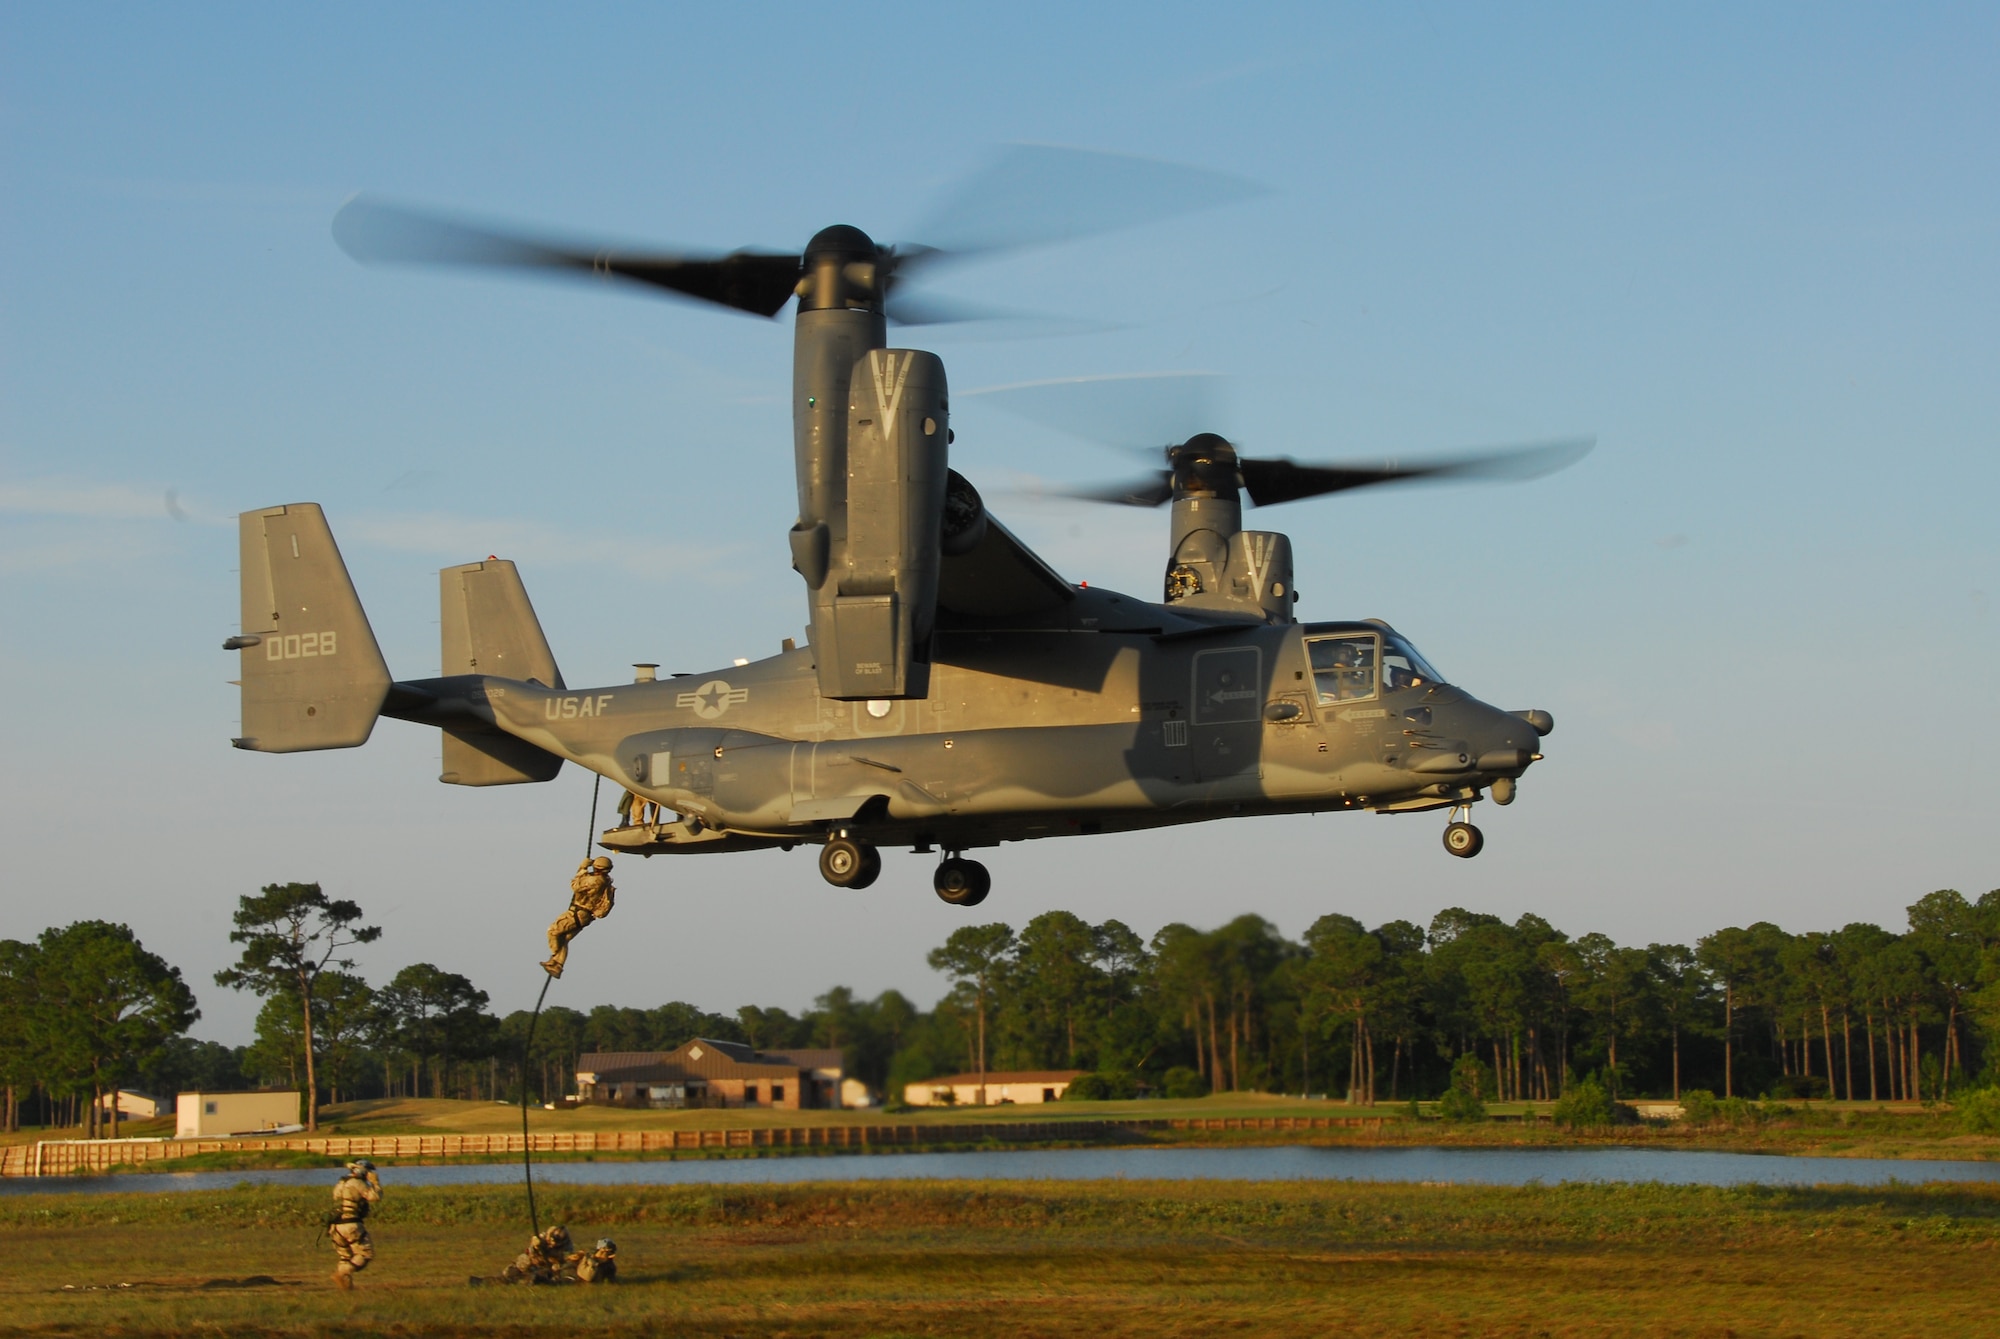 Air Force special tactics Airmen practice fast-roping from a CV-22 Osprey at Hurlburt Field, Fla., May 22, 2007.  The Osprey is flown by Air Force Special Operations Command's 8th Special Operations Squadron at Hurlburt.  (US Air Force photo by Chief Master Sgt. Gary Emery) (Released)